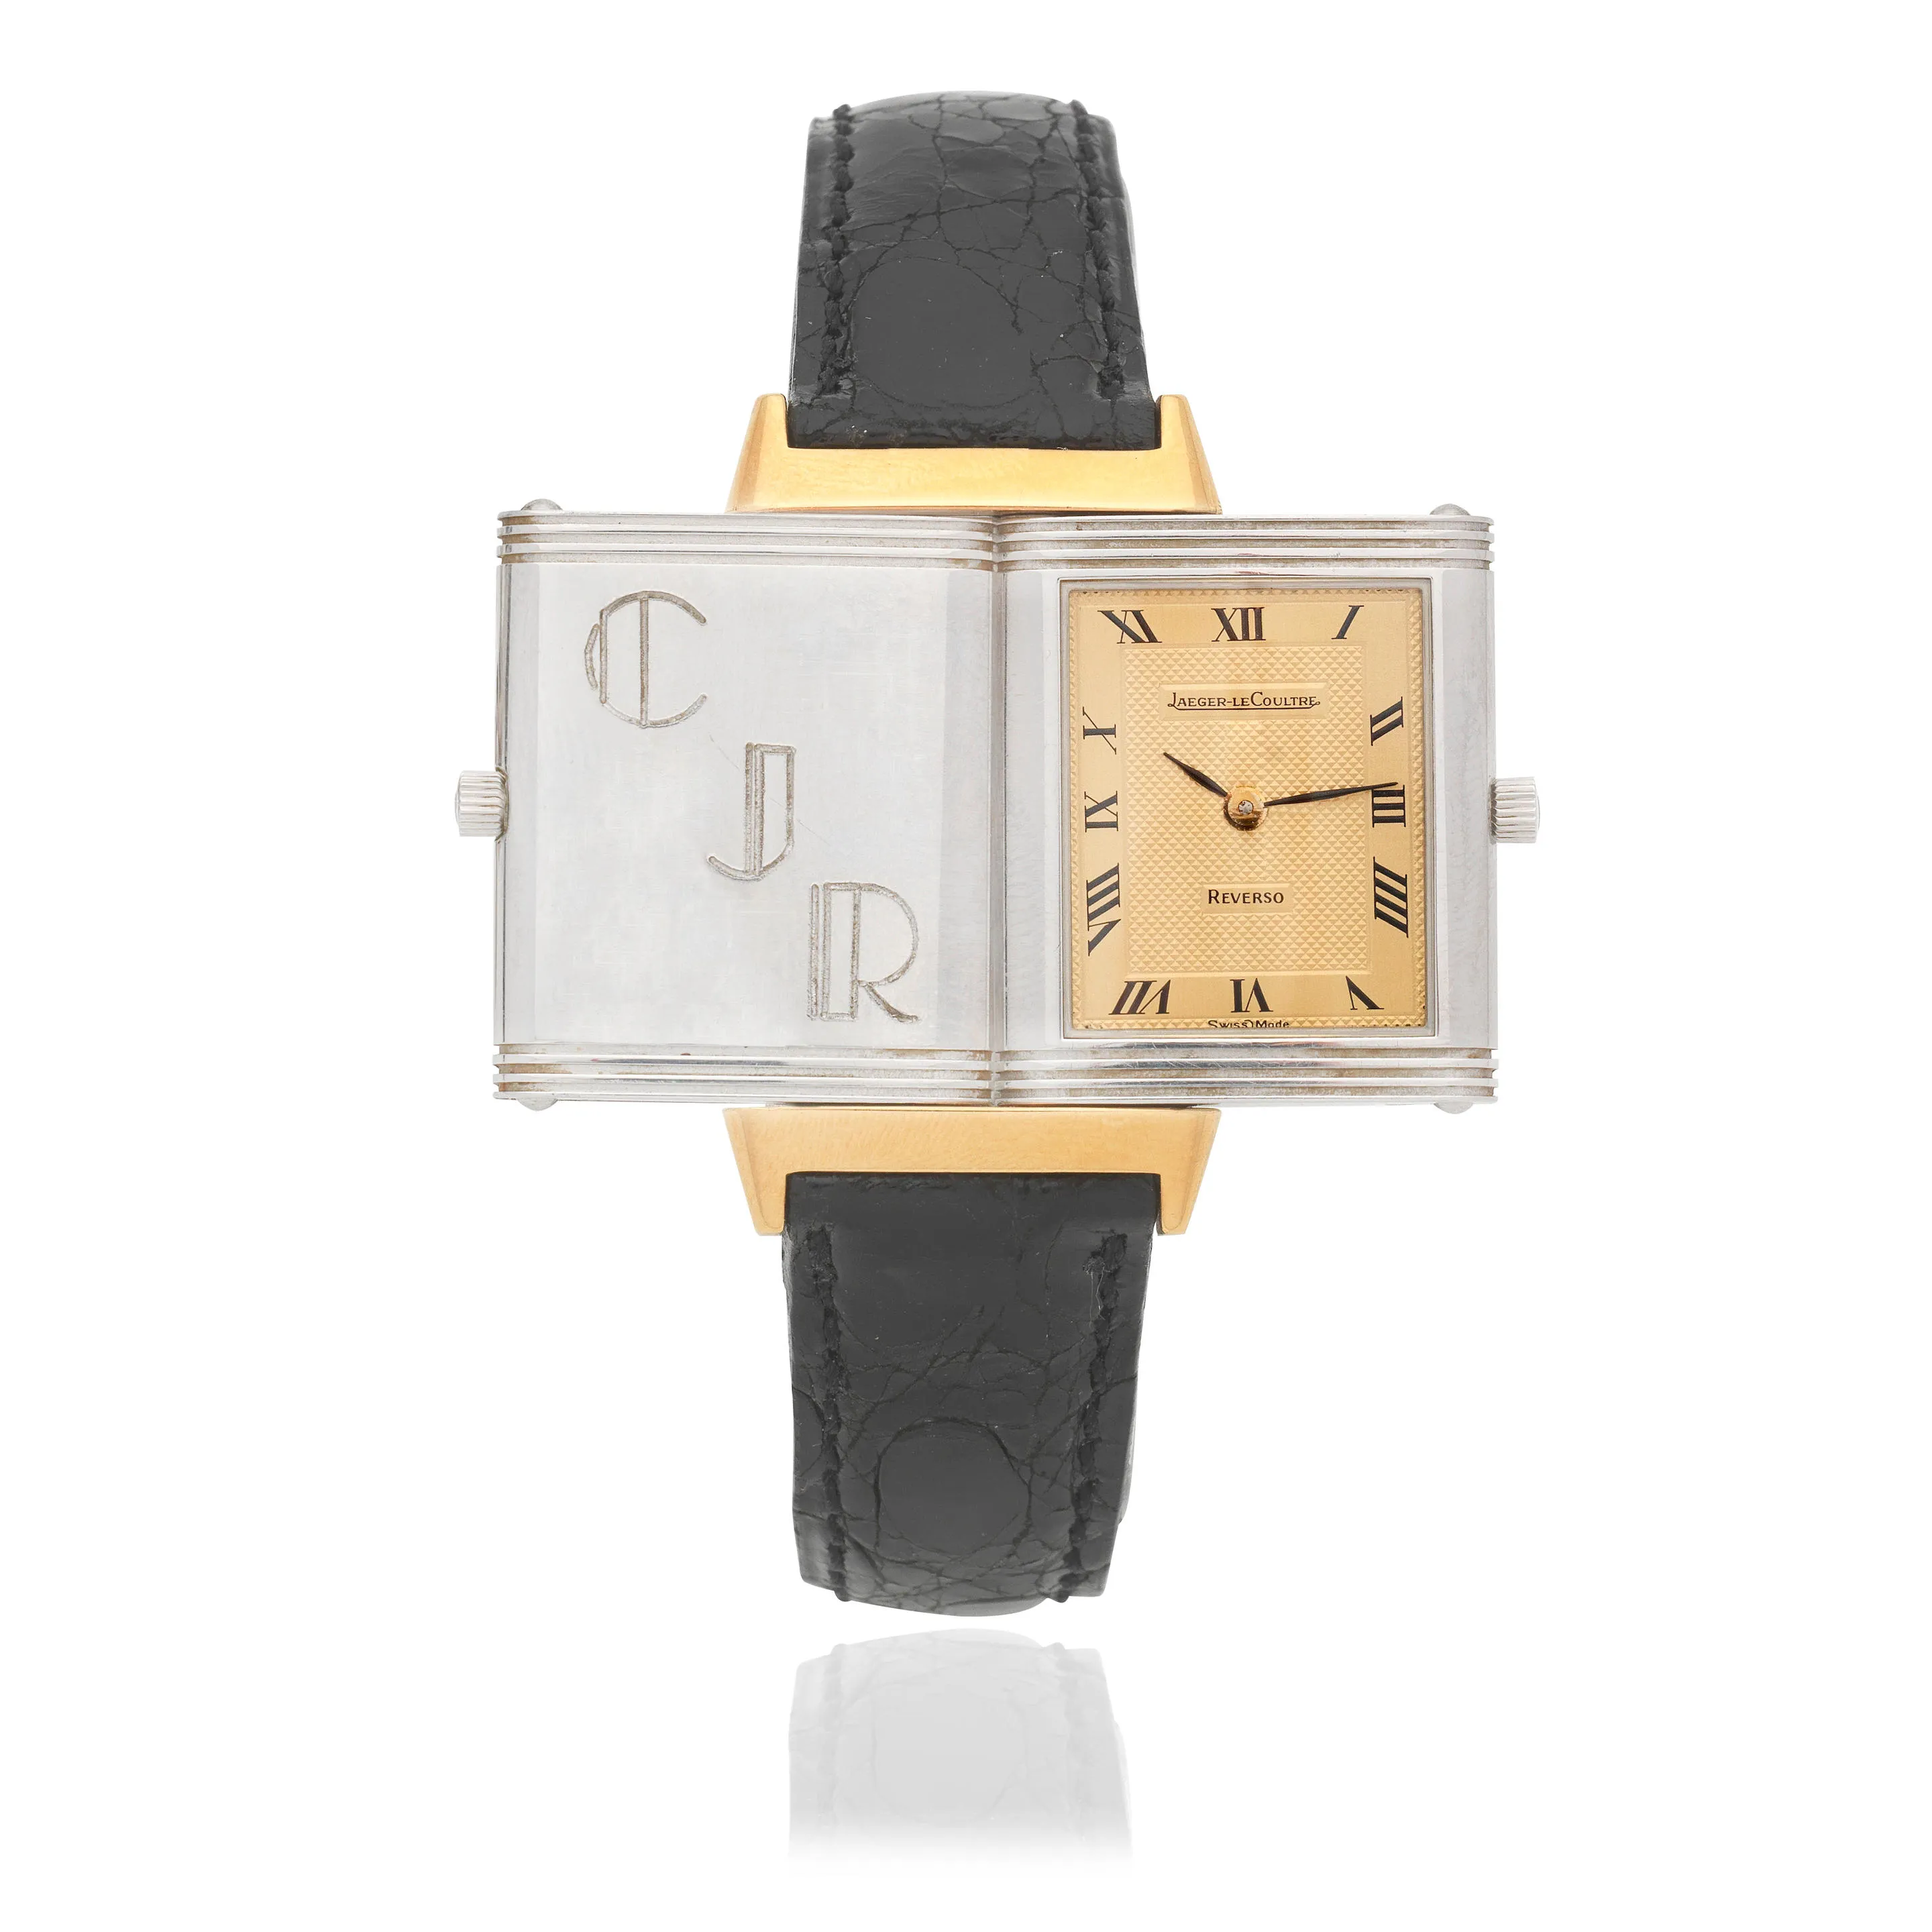 Jaeger-LeCoultre Reverso 140.251.5 23mm Yellow gold and stainless steel Champagne